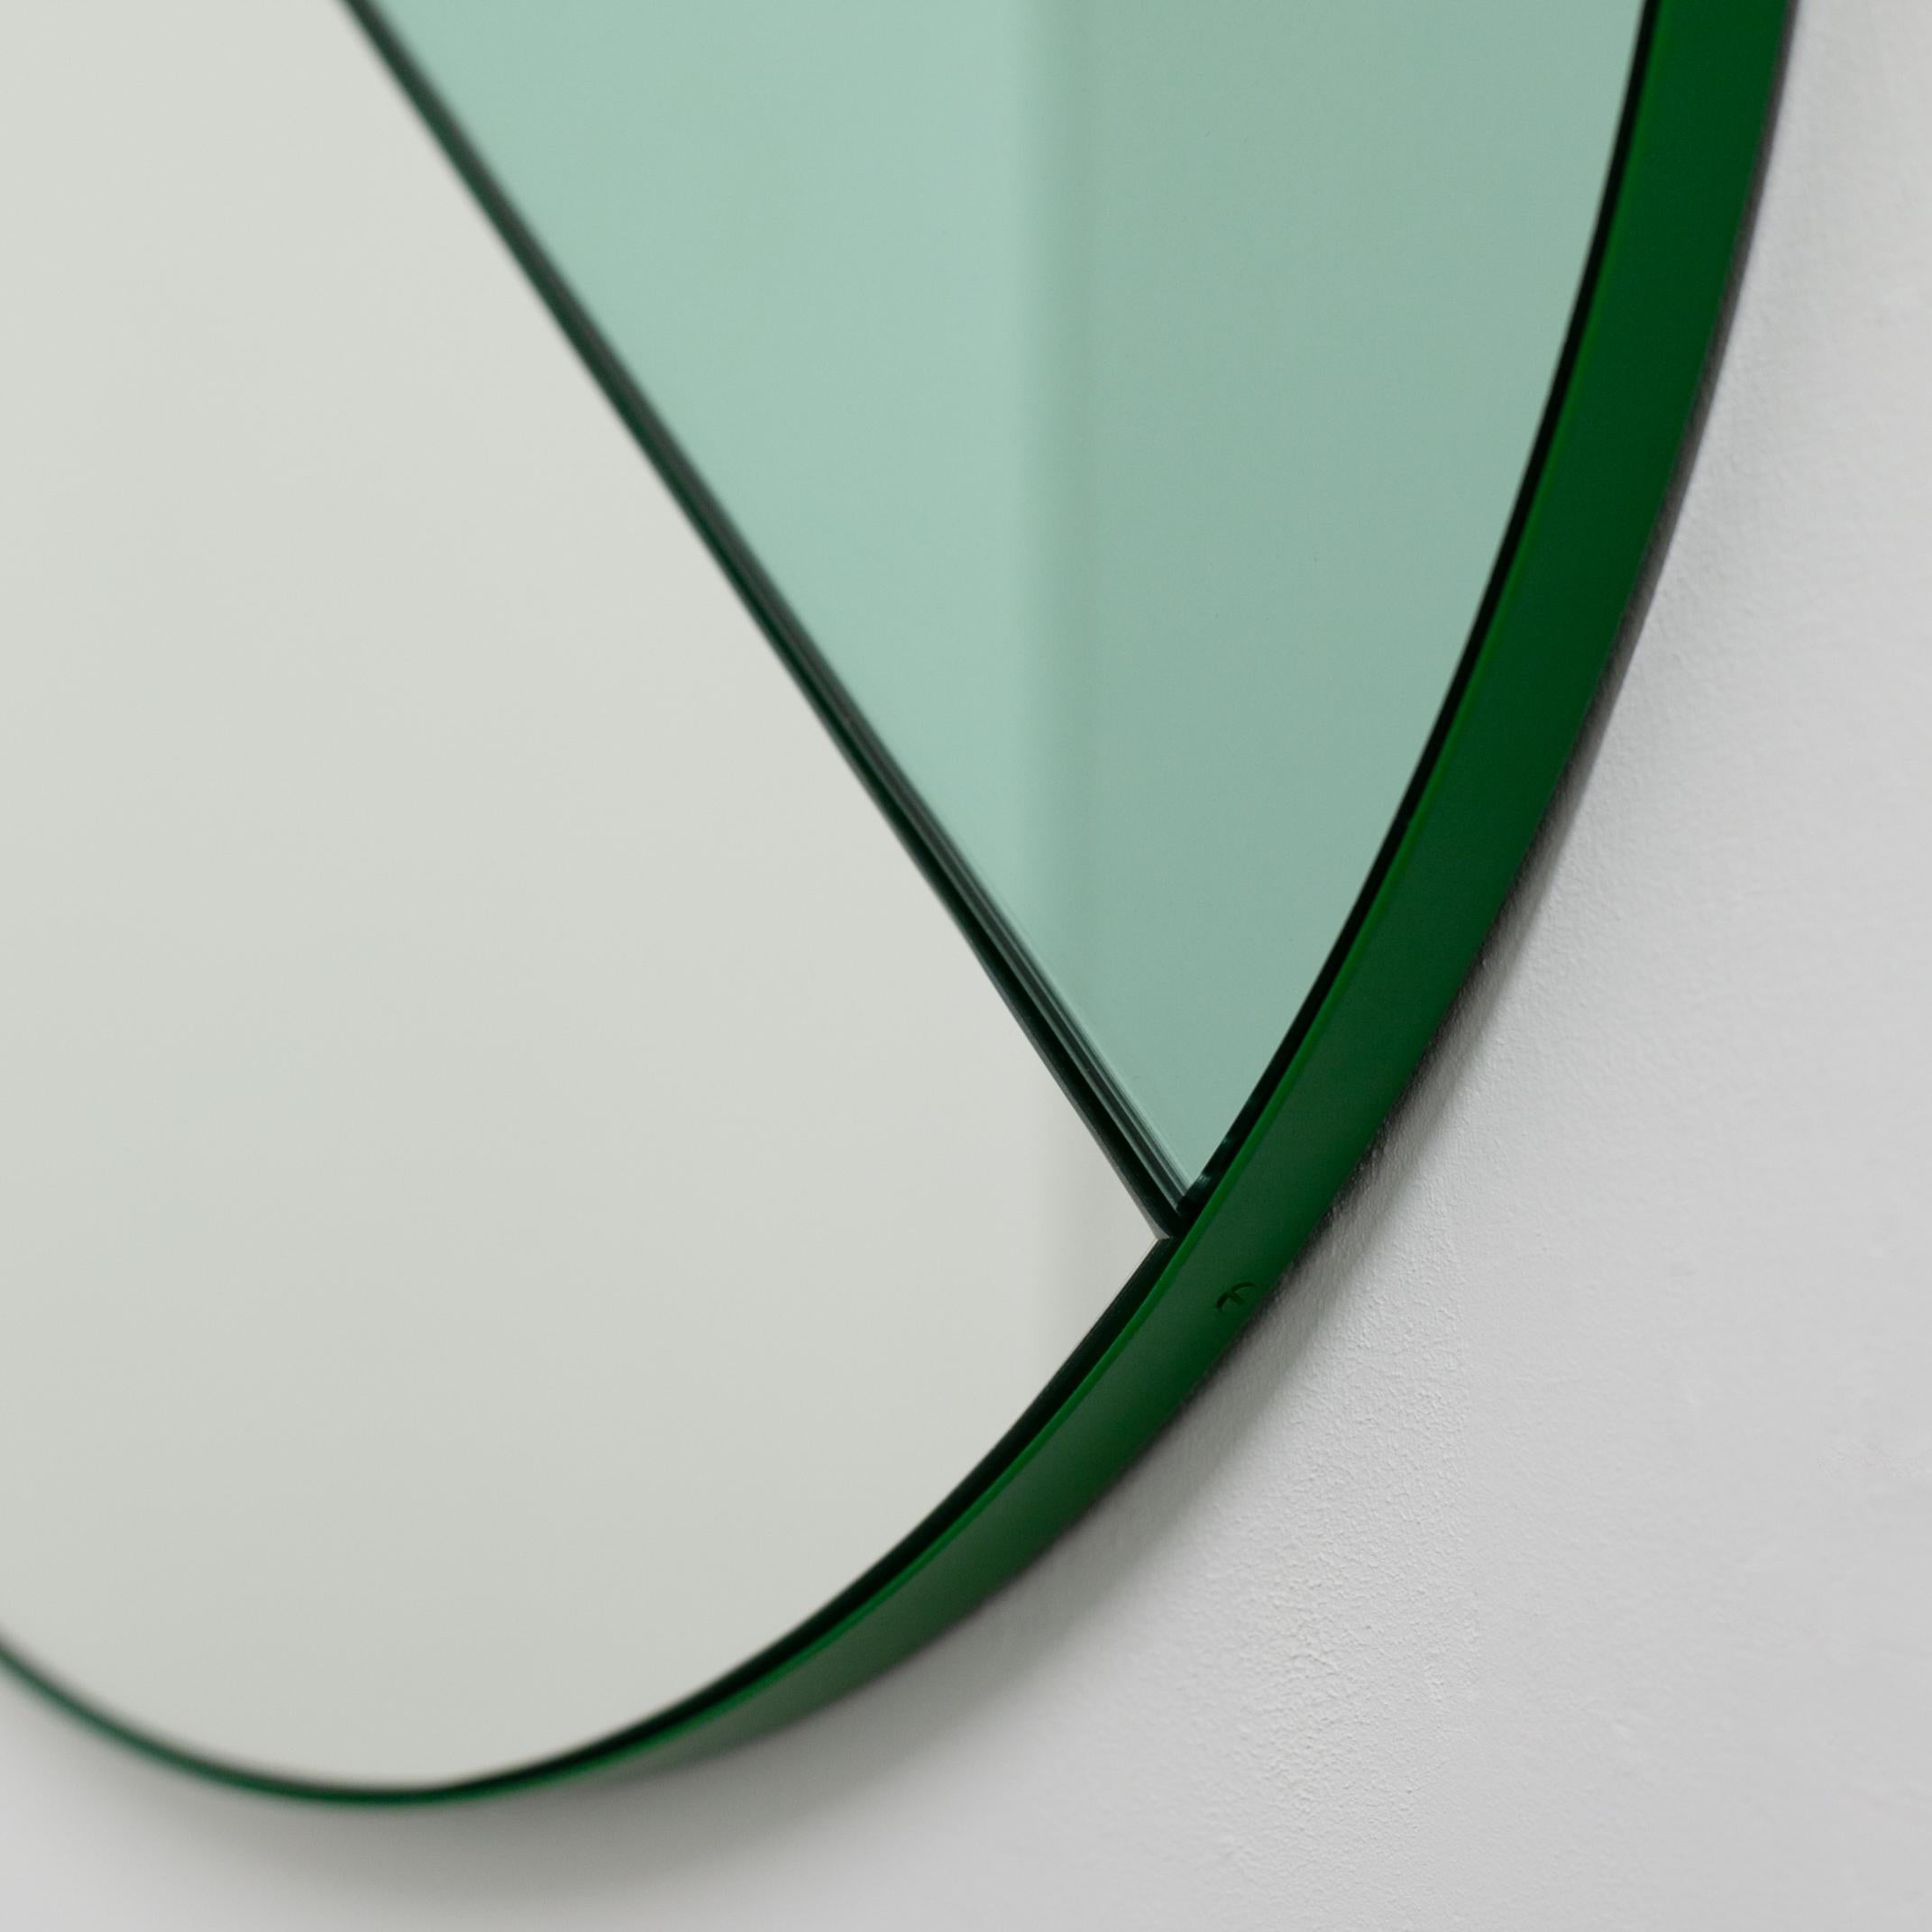 Contemporary Orbis Dualis Mixed 'Green + Silver' Round Mirror with Green Frame, Small